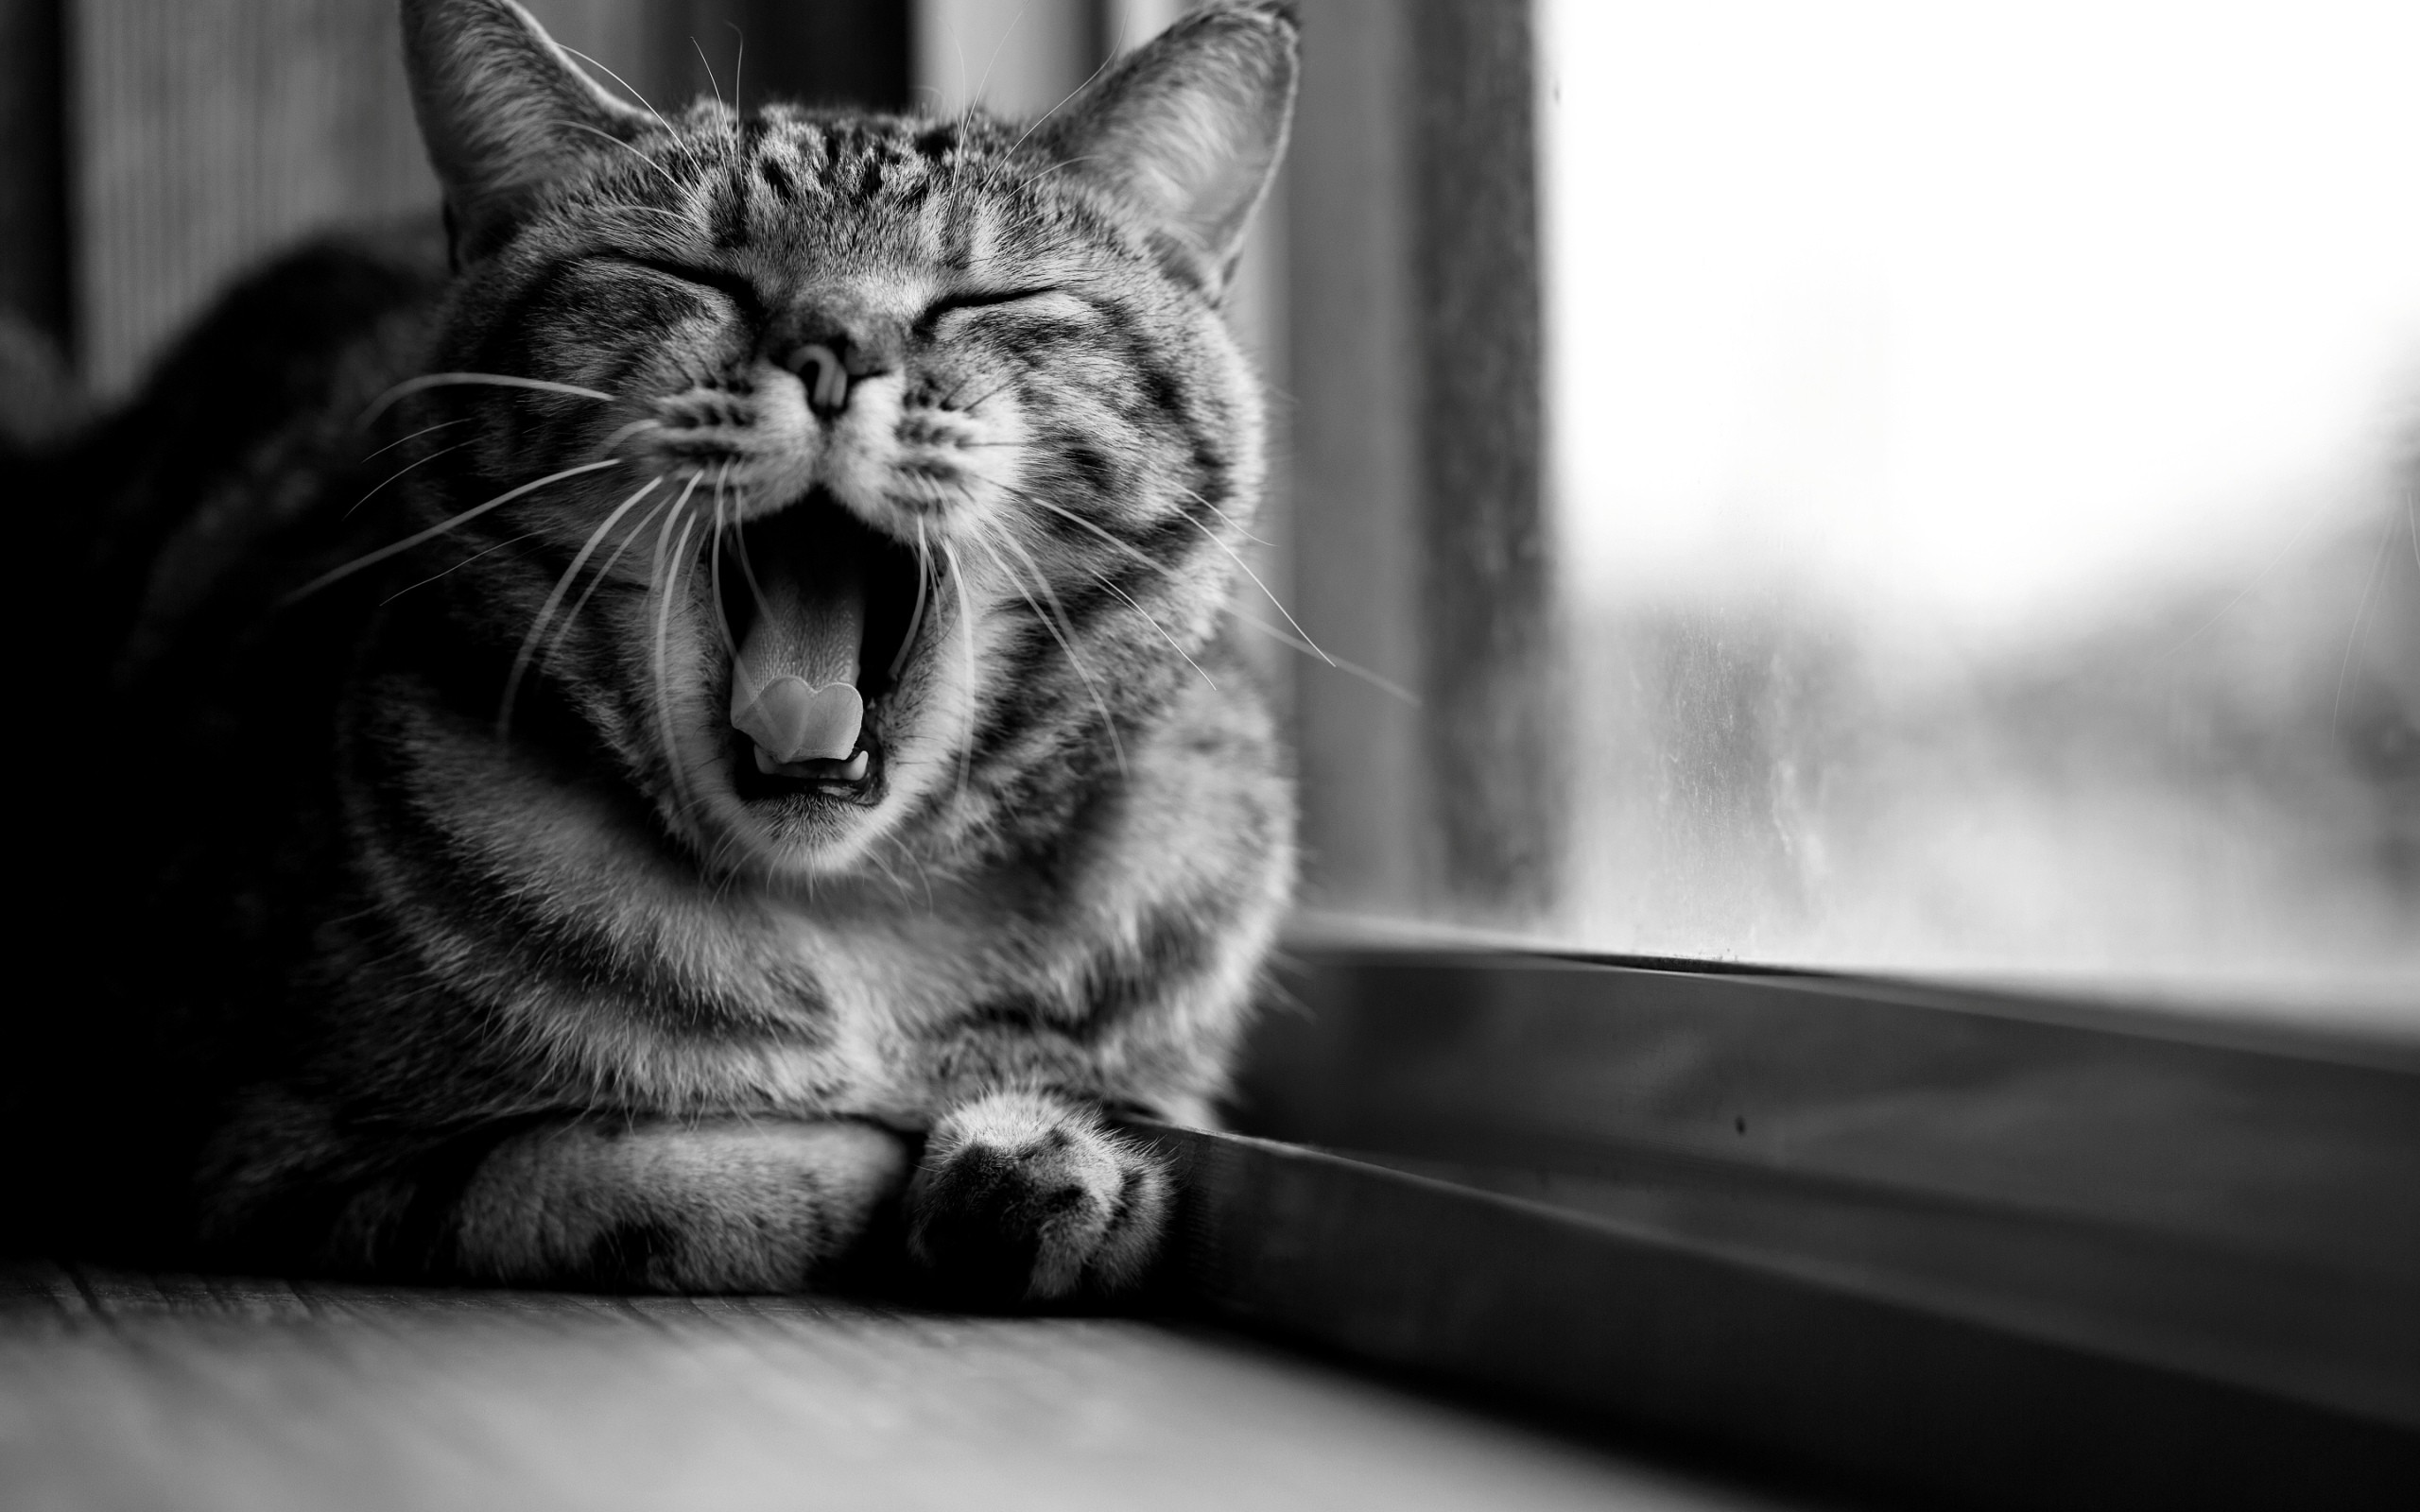 General 2560x1600 cats animals open mouth monochrome yawning window sill mammals indoors